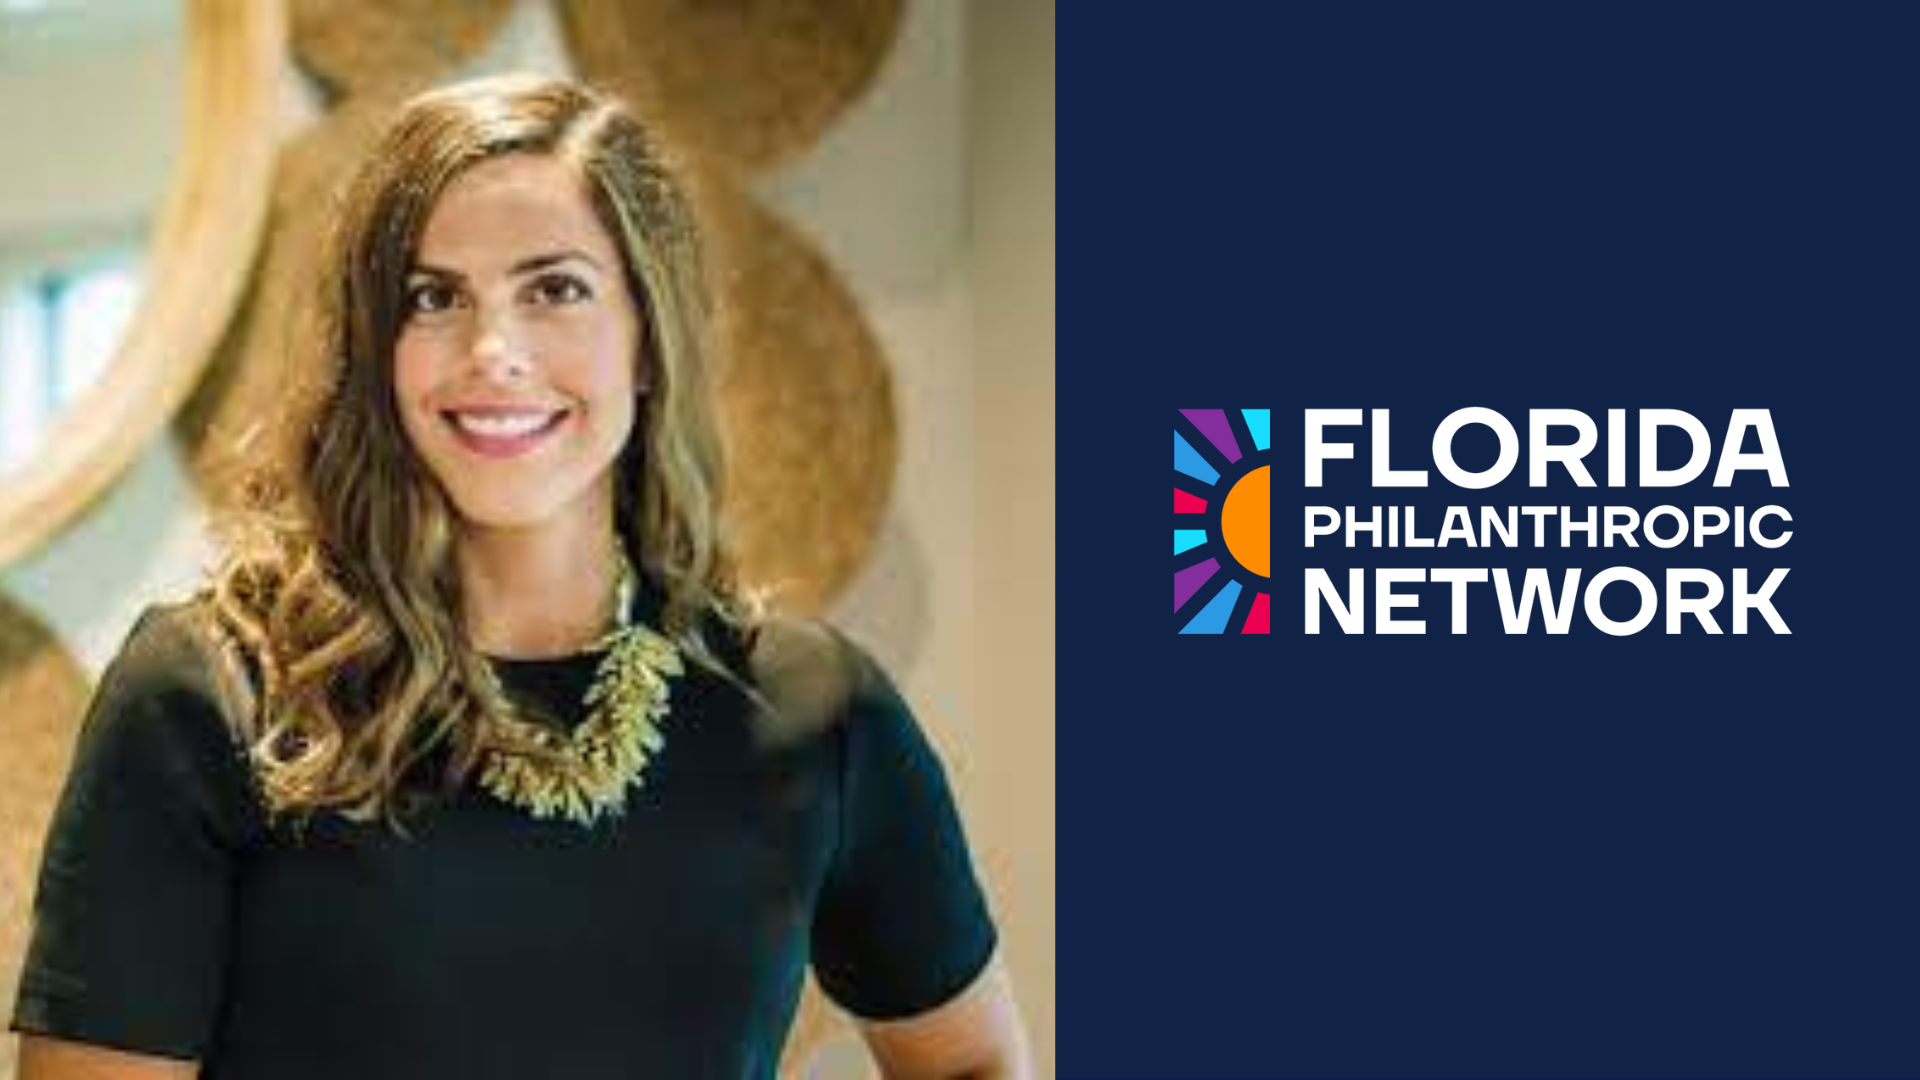 Ashley Dietz and the Florida Philanthropic Network